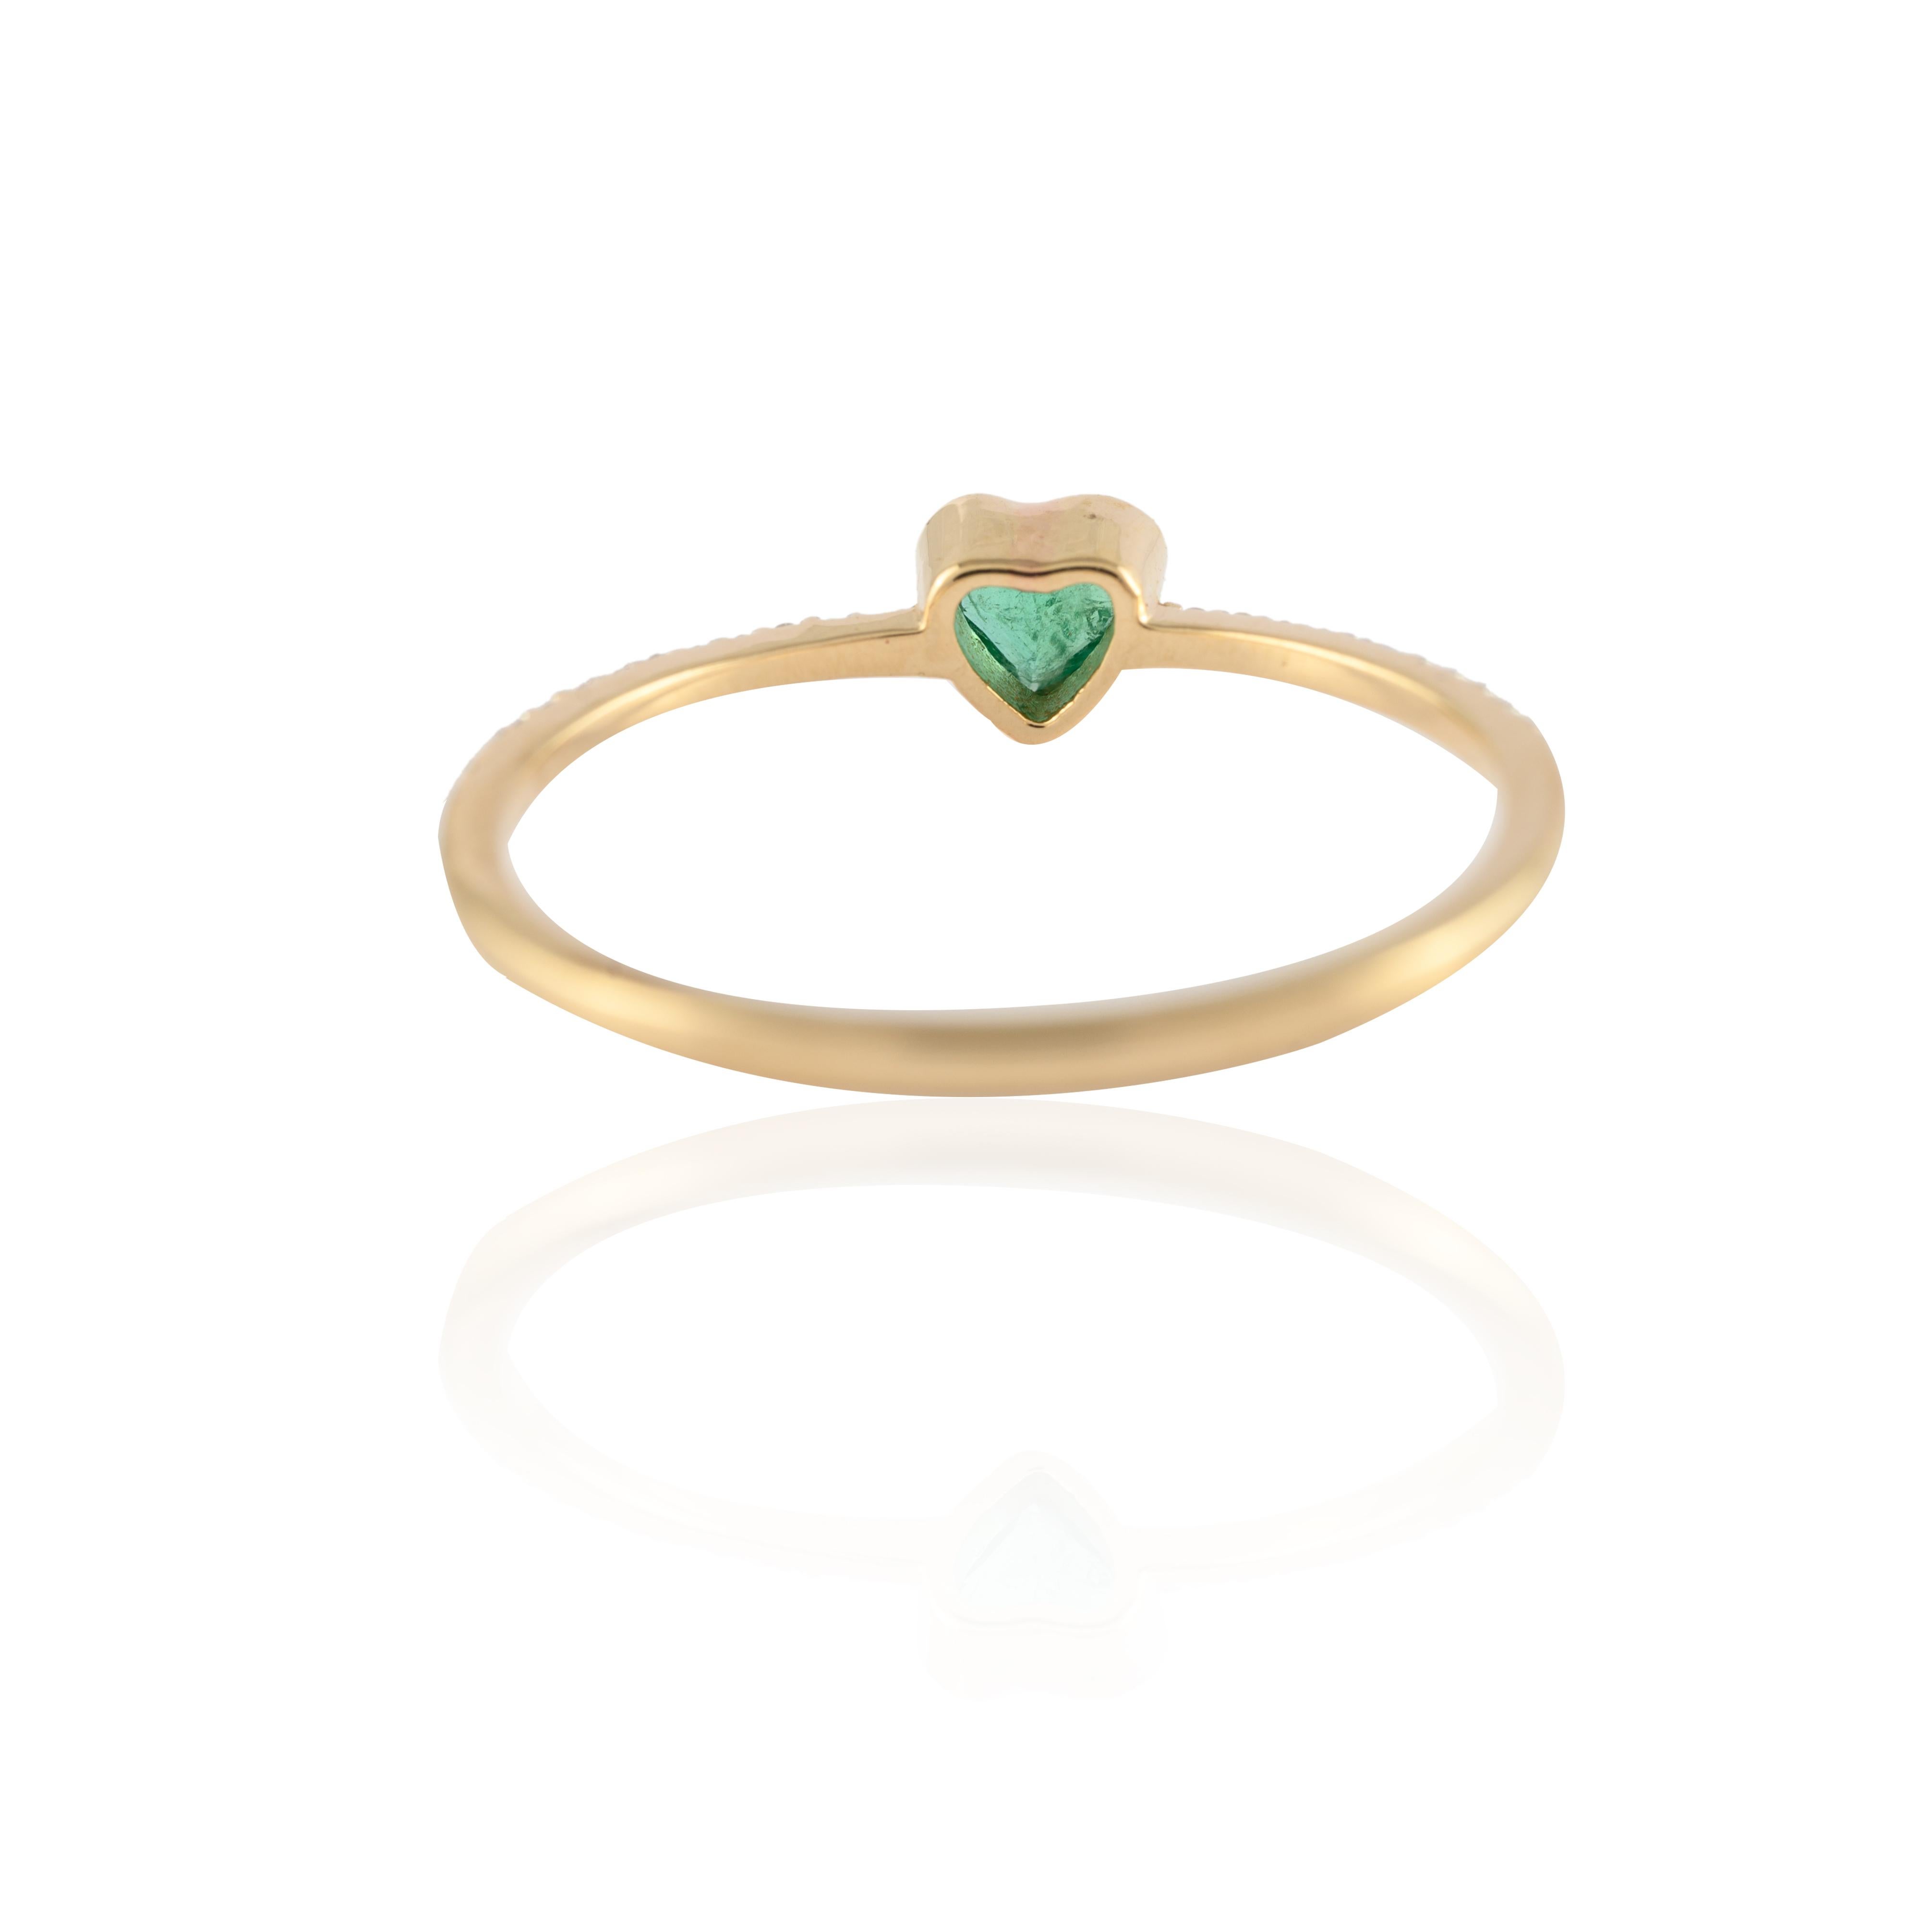 For Sale:  Minimalist Heart Cut Emerald Ring Set in 14k Solid Yellow Gold with Diamonds 4